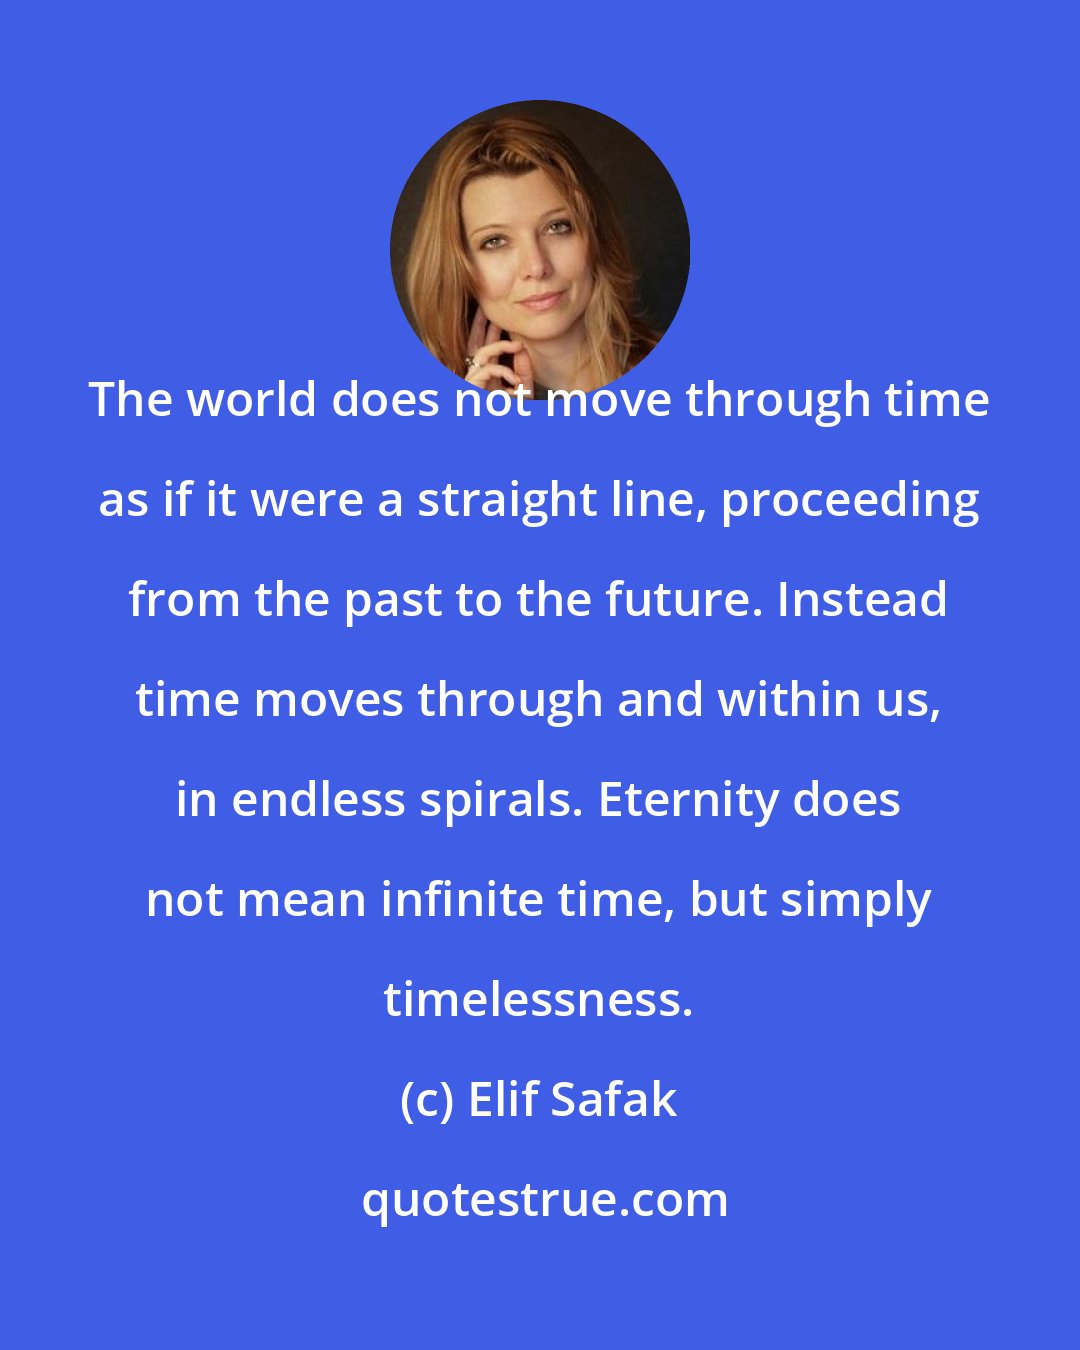 Elif Safak: The world does not move through time as if it were a straight line, proceeding from the past to the future. Instead time moves through and within us, in endless spirals. Eternity does not mean infinite time, but simply timelessness.